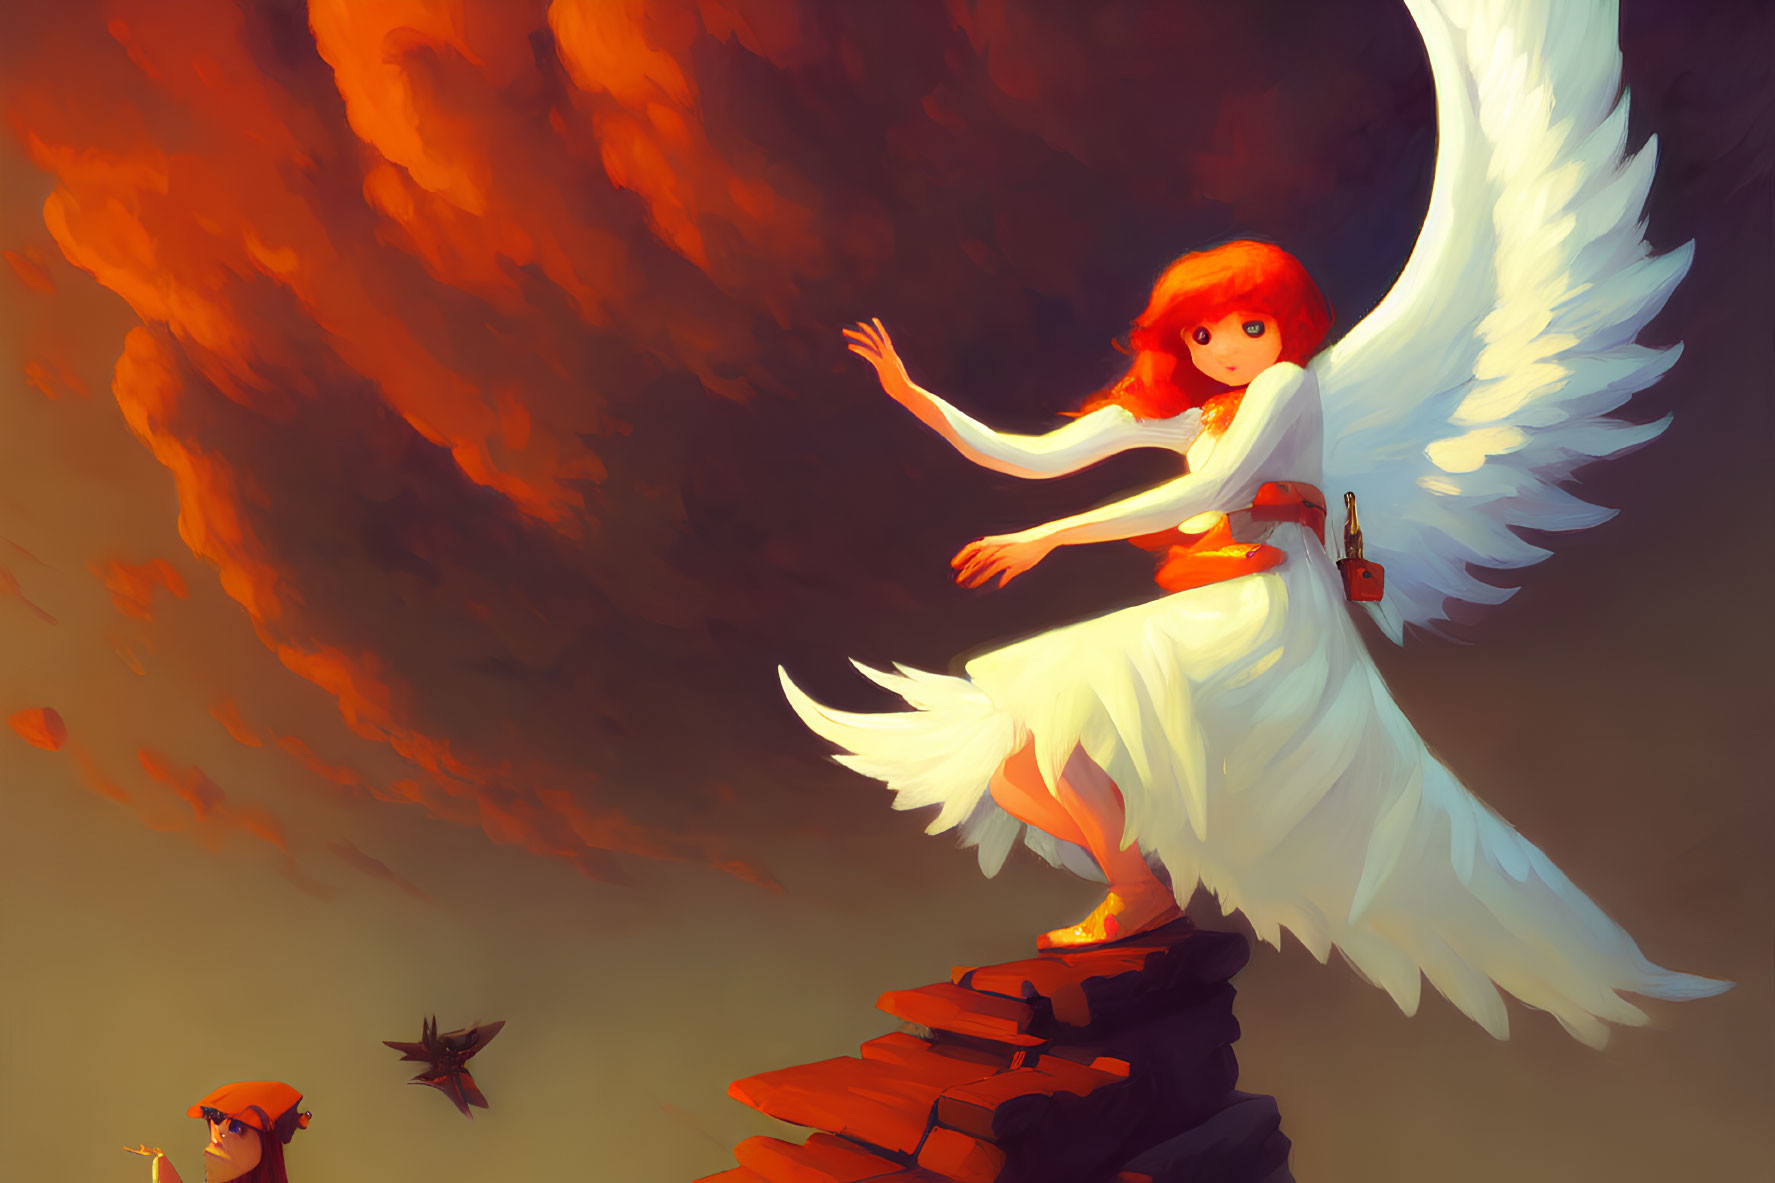 Winged red-haired character in white dress on rocky outcrop with fiery orange backdrop and bird-like creature